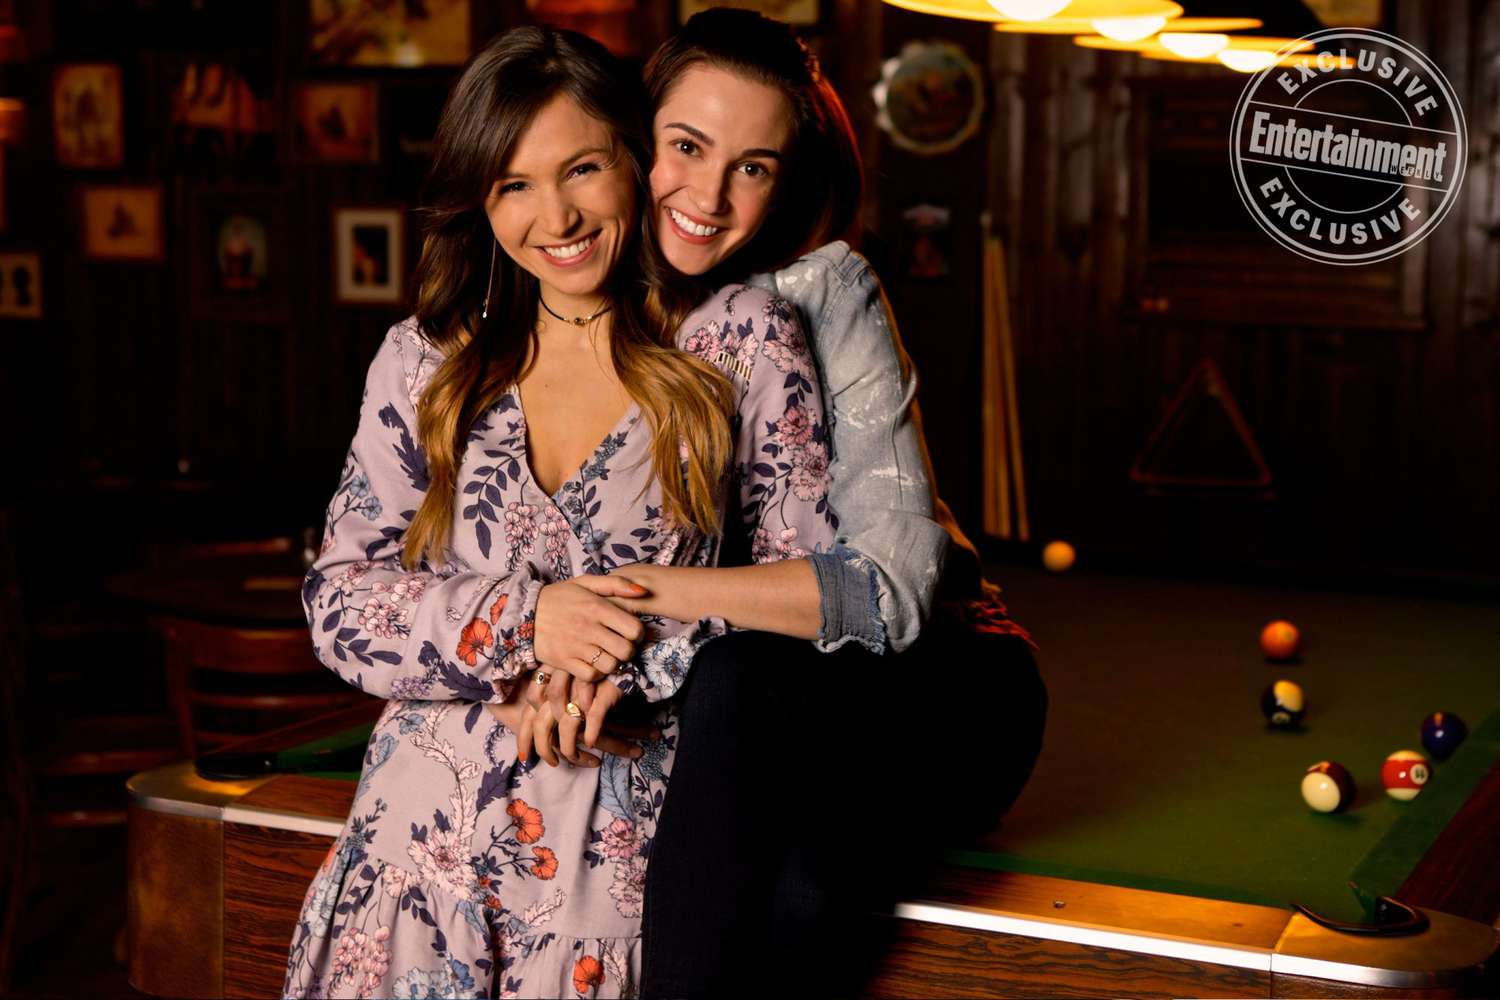 Dominique Provost-Chalkley as Waverly Earp, and Katherine Barrell as Nicole Haught